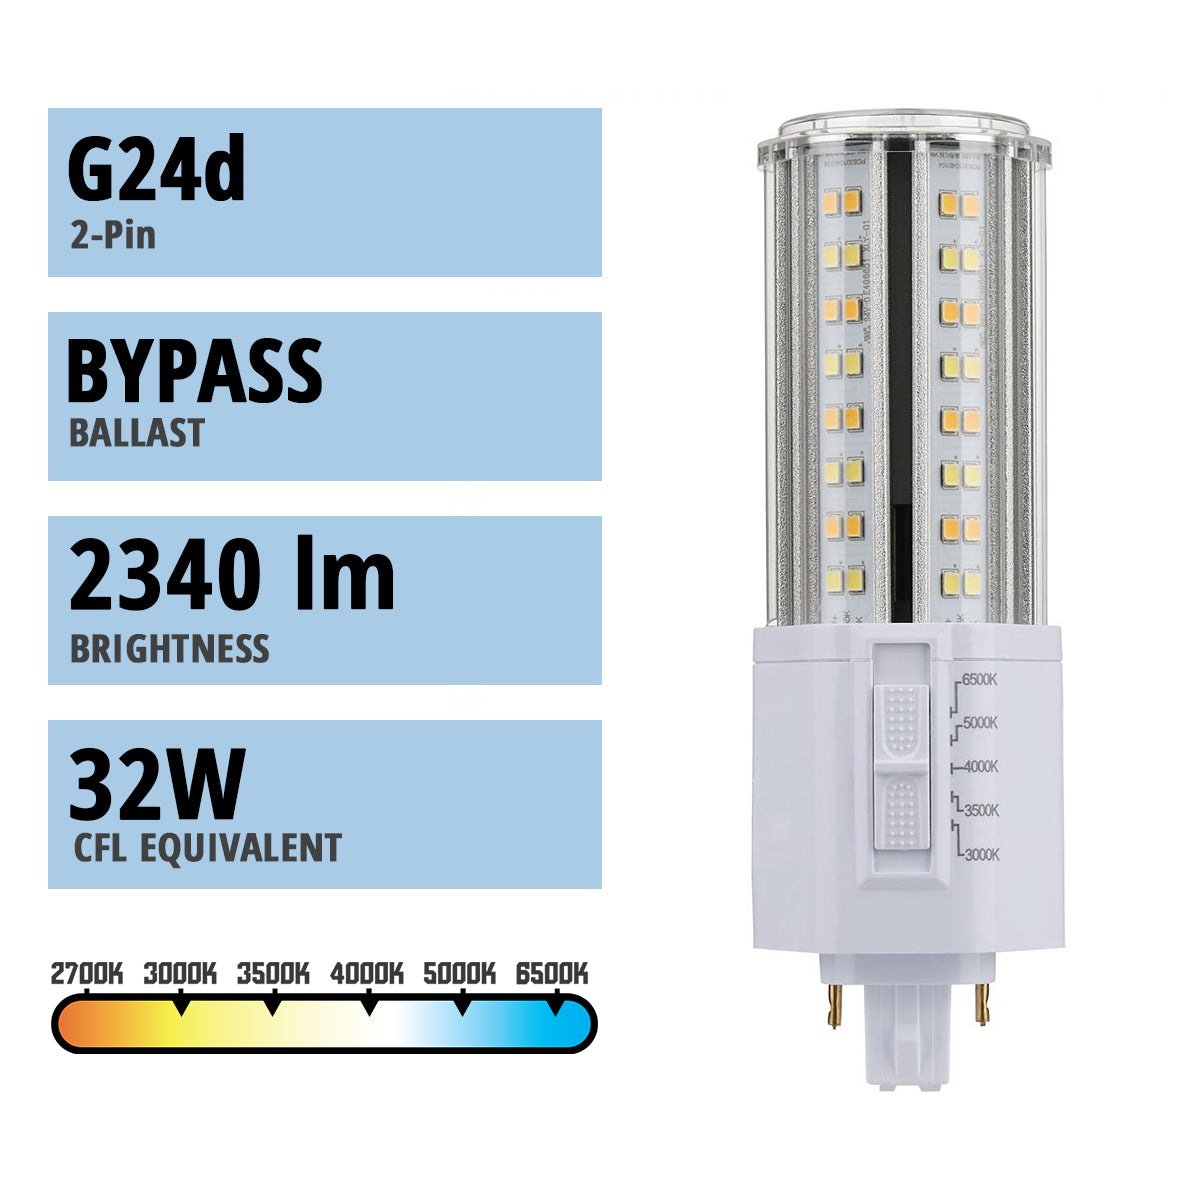 2 pin PL LED Bulb, 18 Watt, 2340 Lumens, Selectable CCT 3000K to 6500K, Universal, Replaces 32W CFL, G24d Base, Type B Ballast Bypass - Bees Lighting